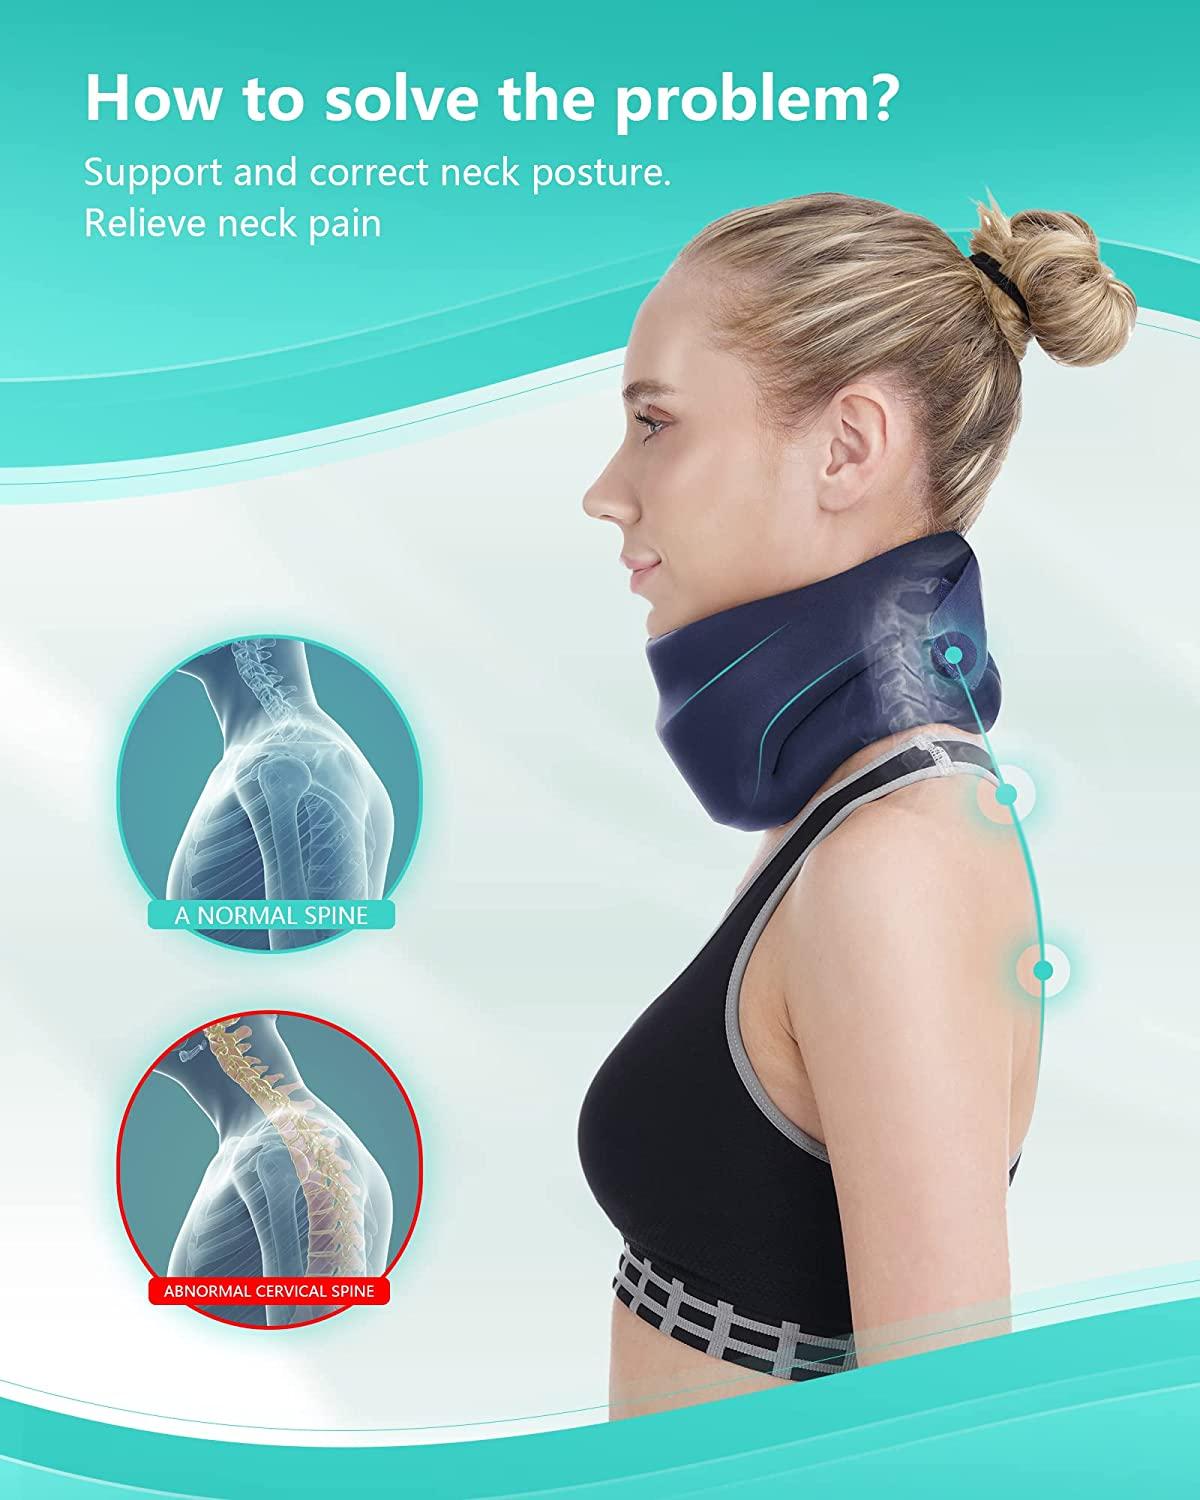 Neck Brace Foam Cervical Collar Stabilizes Spine Spinal Support Sleeping  Work US - La Paz County Sheriff's Office Dedicated to Service